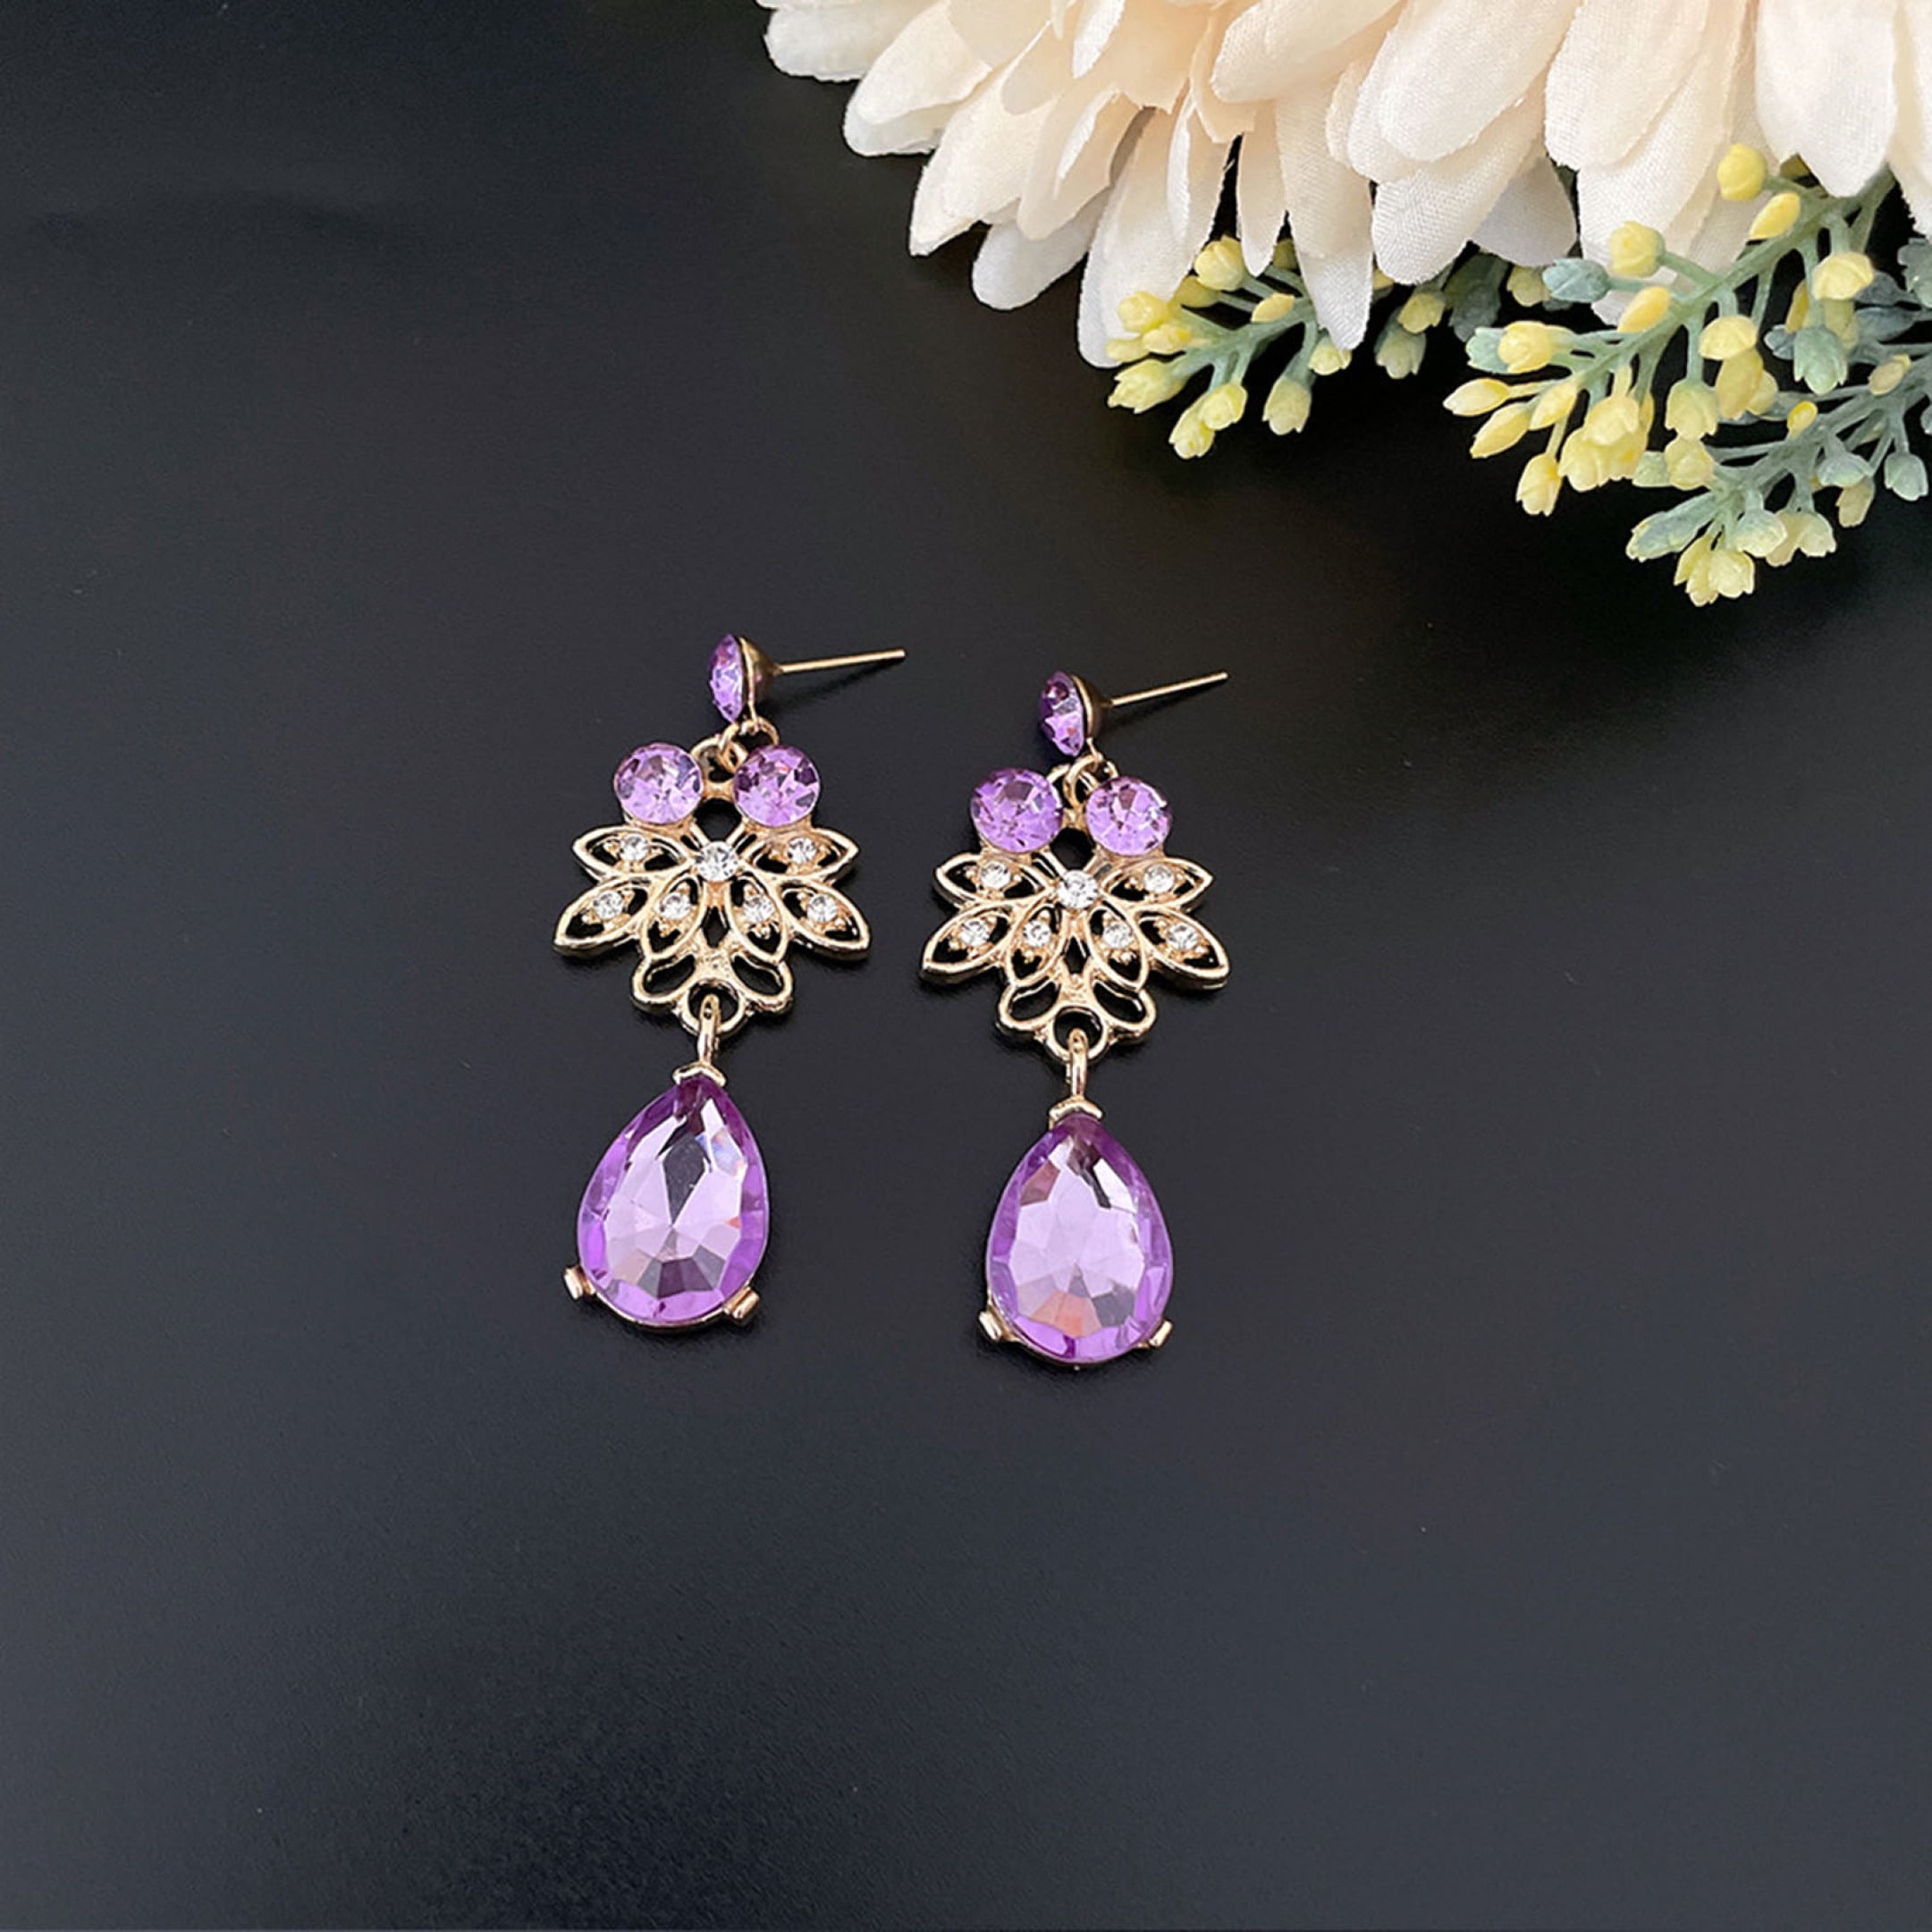 Necklace Earrings Violet Crystal Water-drop Style Bridal Wedding Jewelry  Set Pink 2 